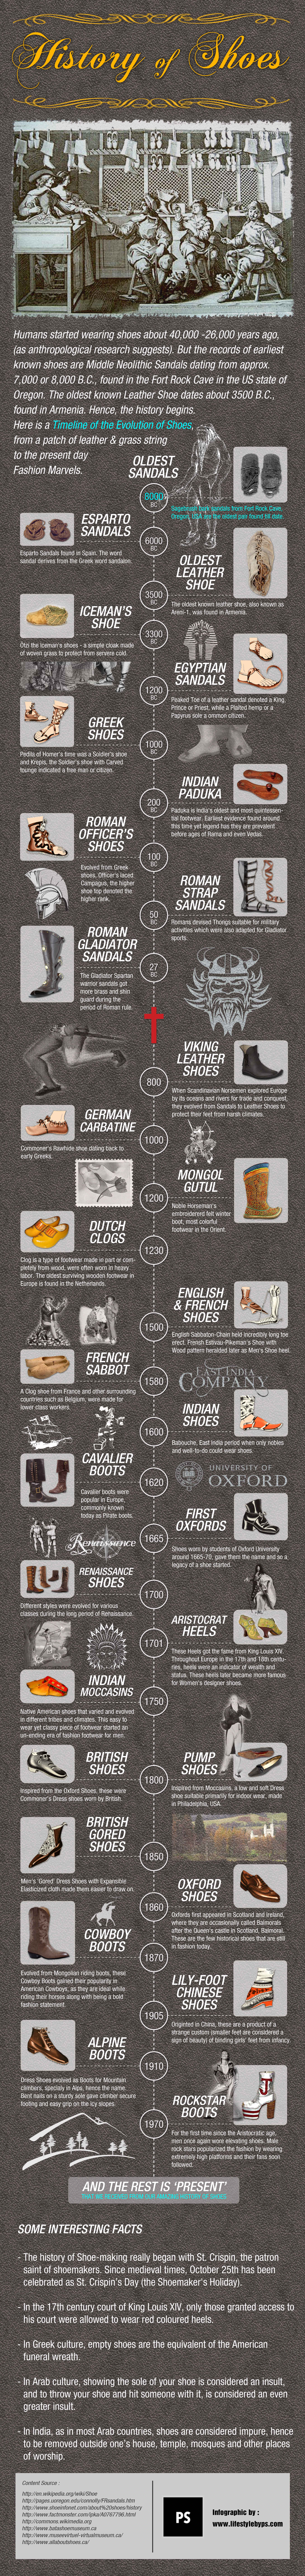 History of Shoes - Infographic